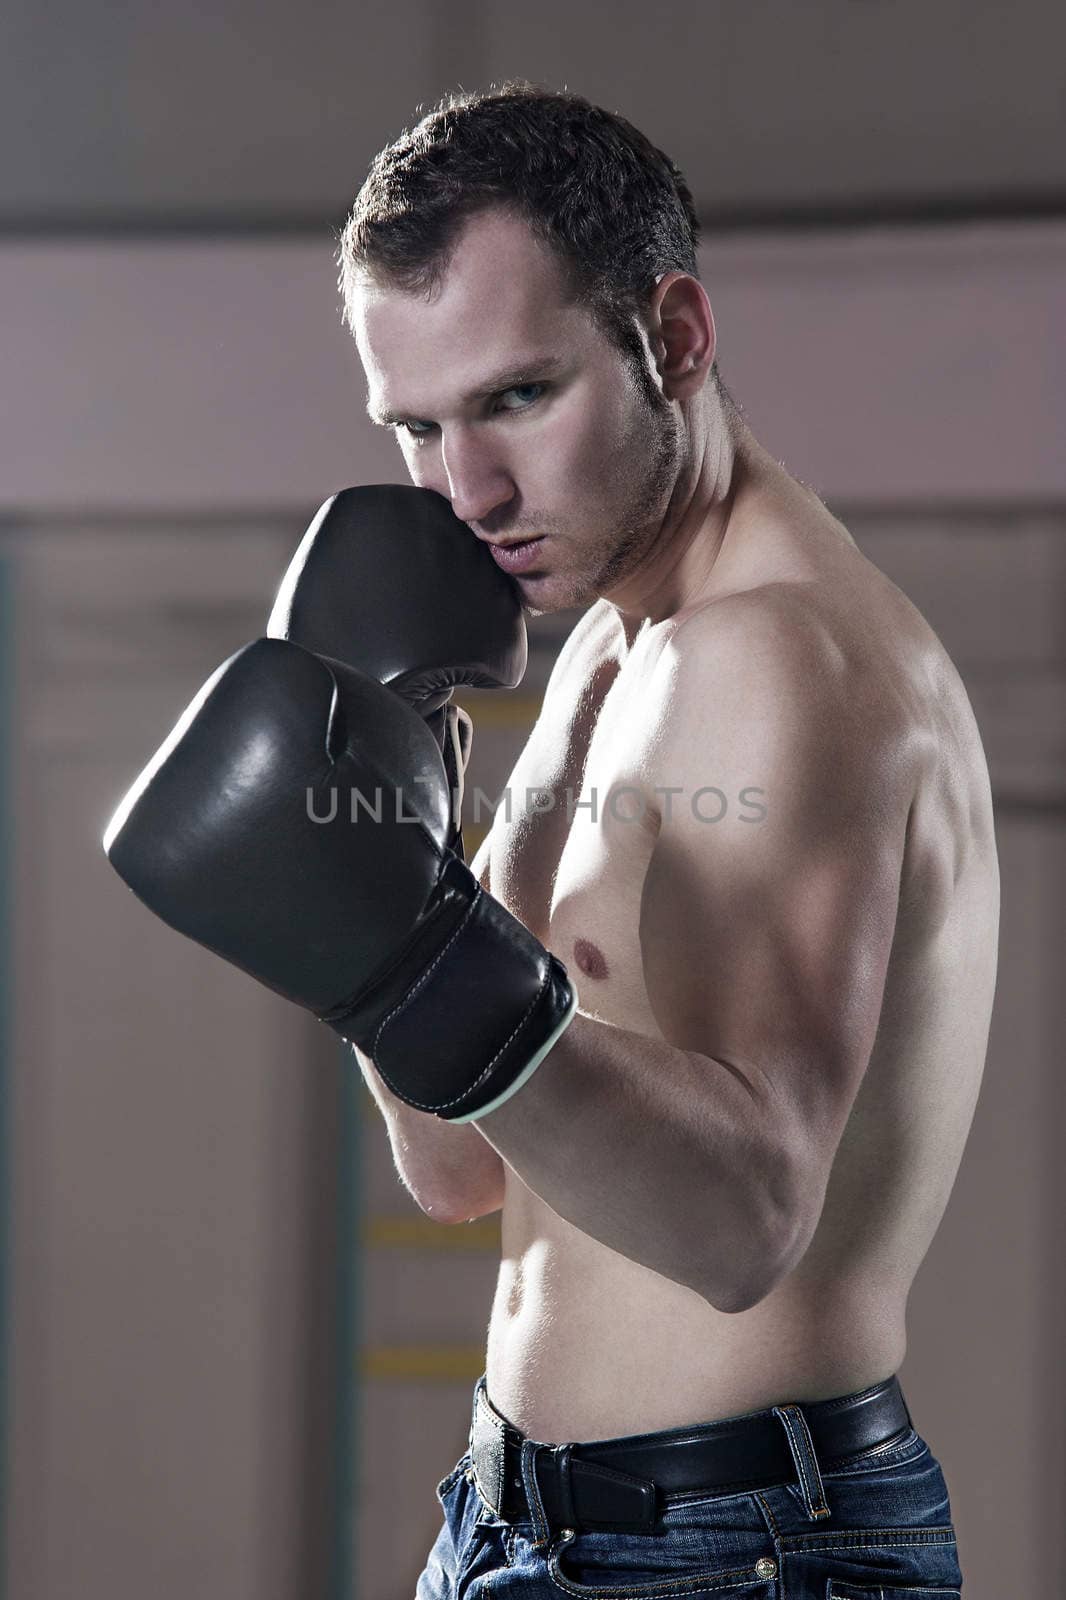 Waist-up of young male boxer in gym